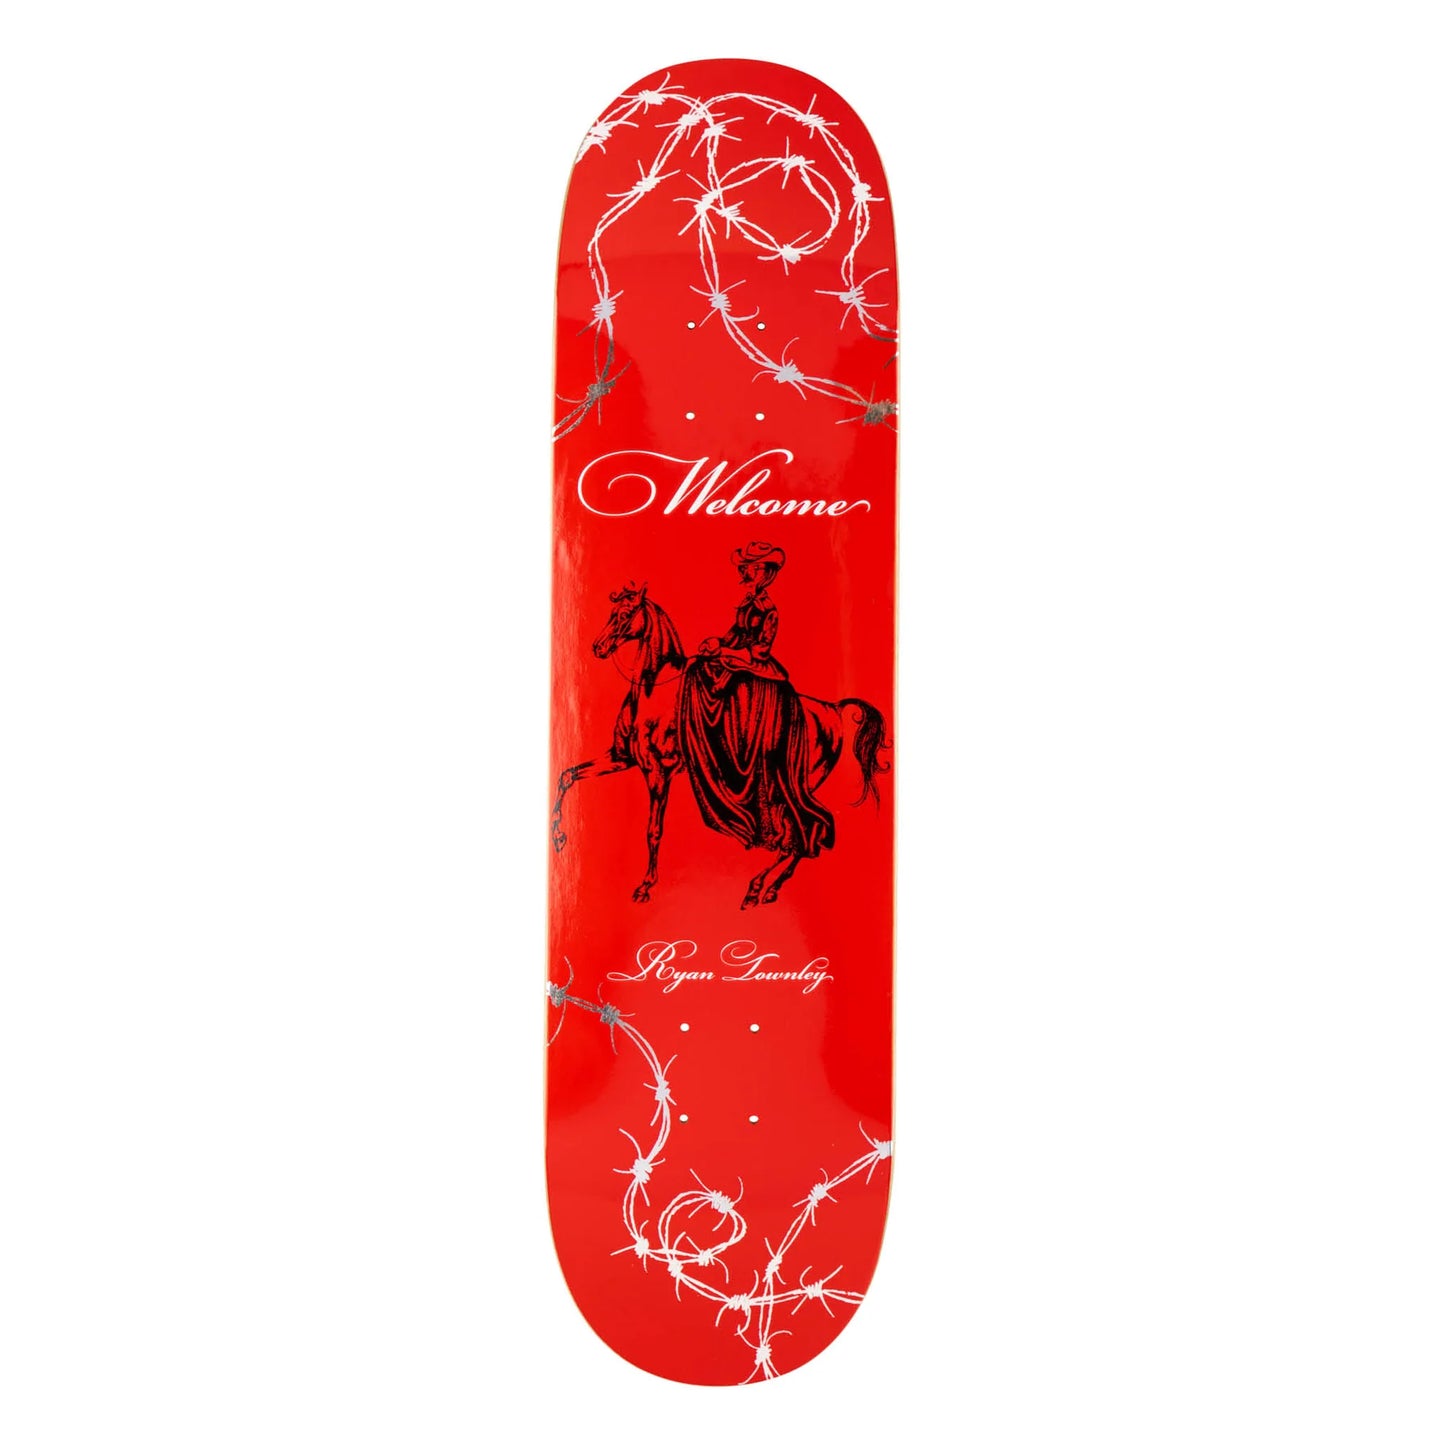 WELCOME RYAN TOWNLEY COWGIRL DECK 8.25